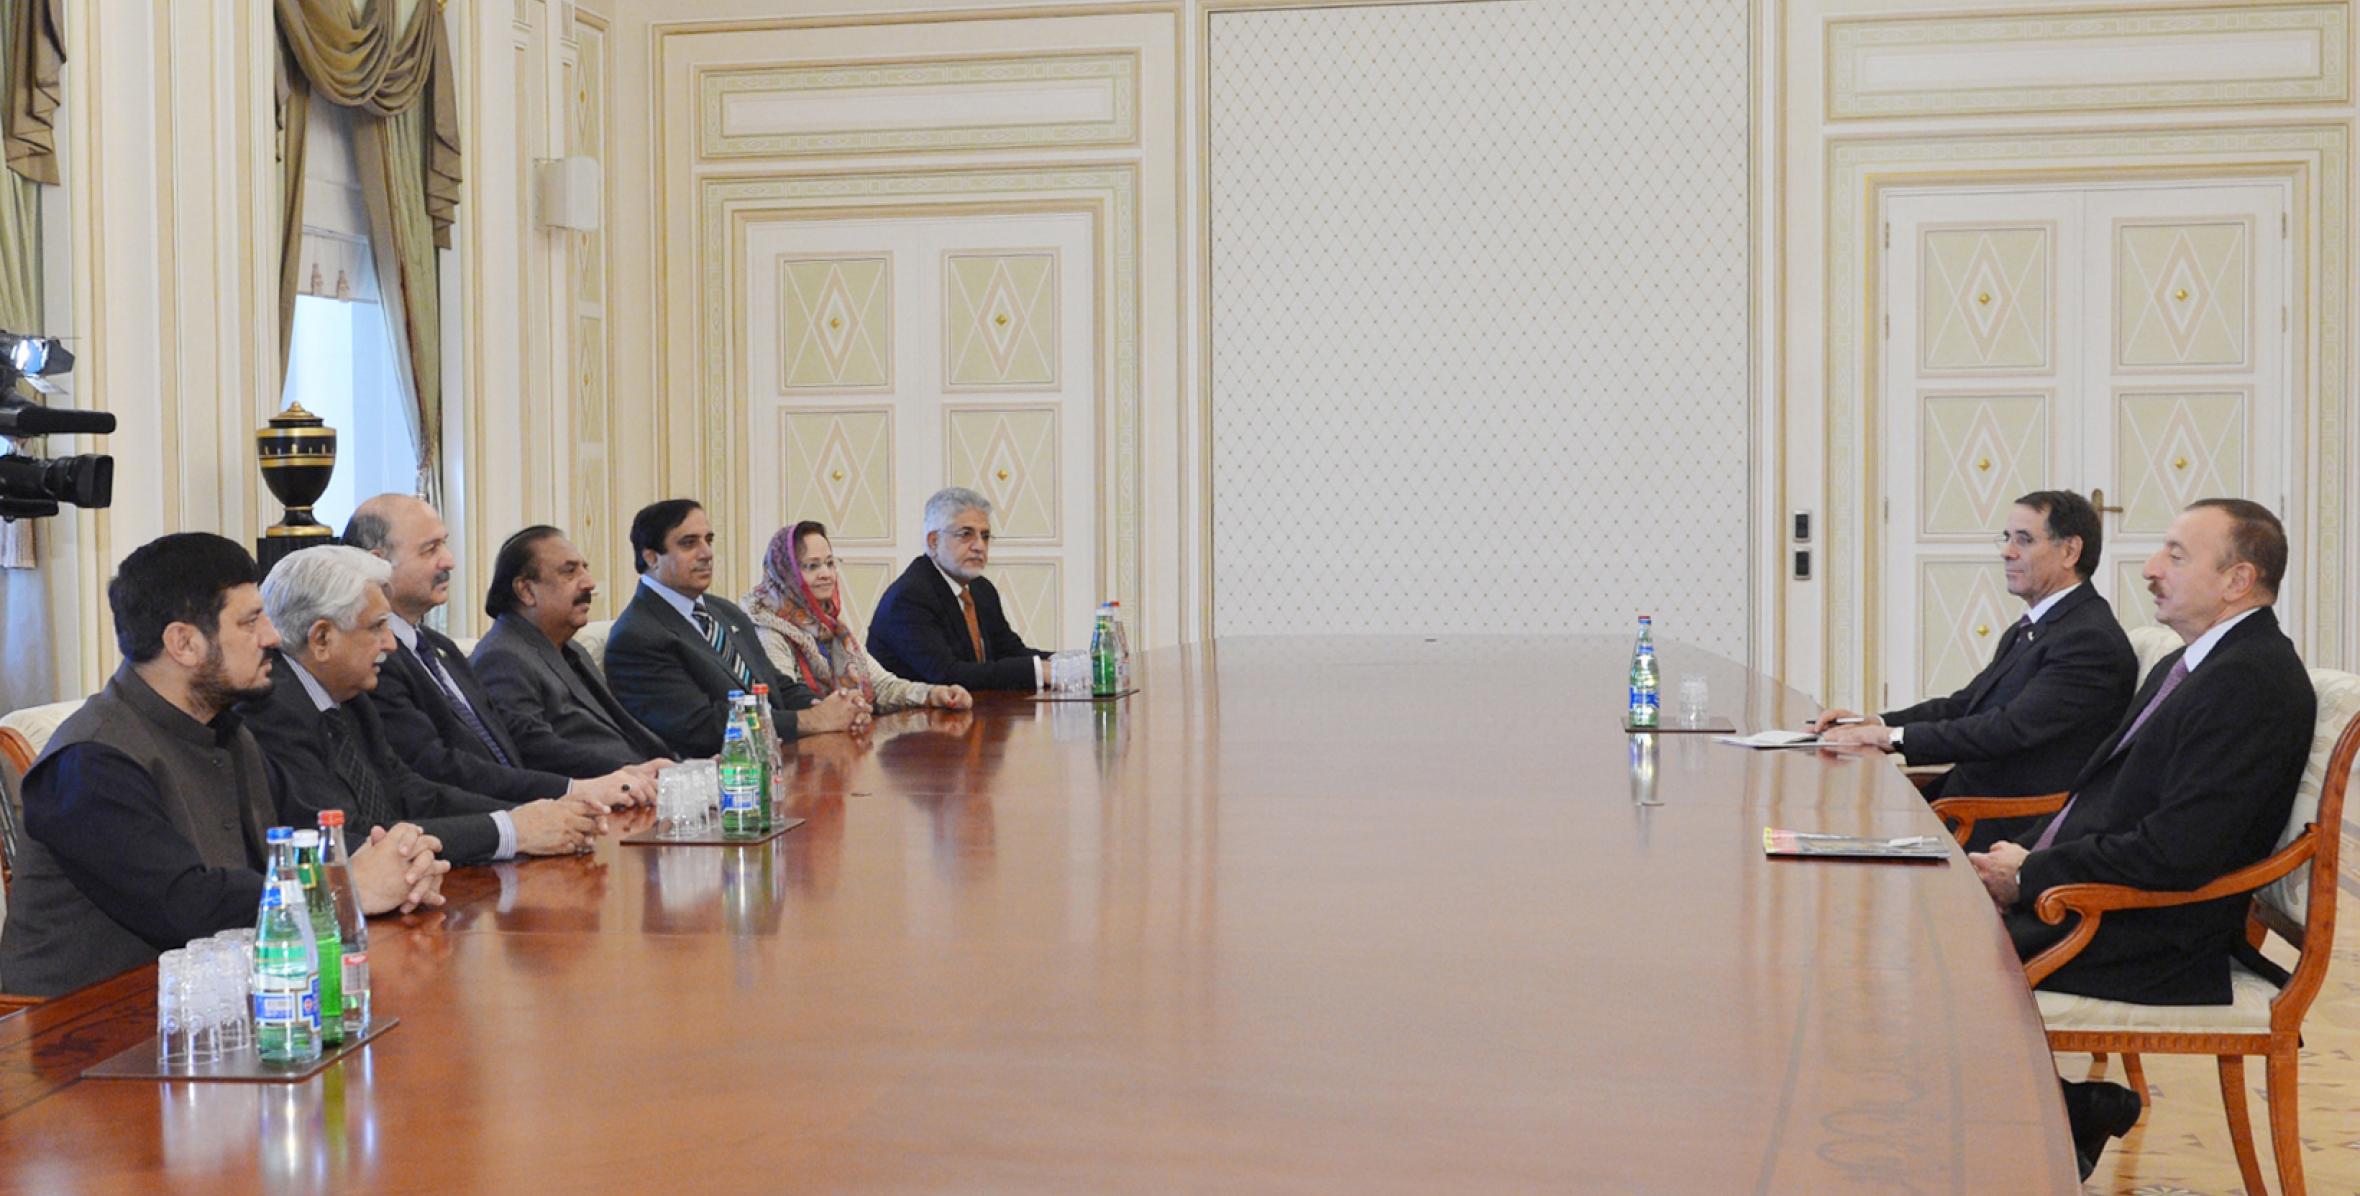 Ilham Aliyev received a delegation led by the Deputy President of the Senate of Pakistan